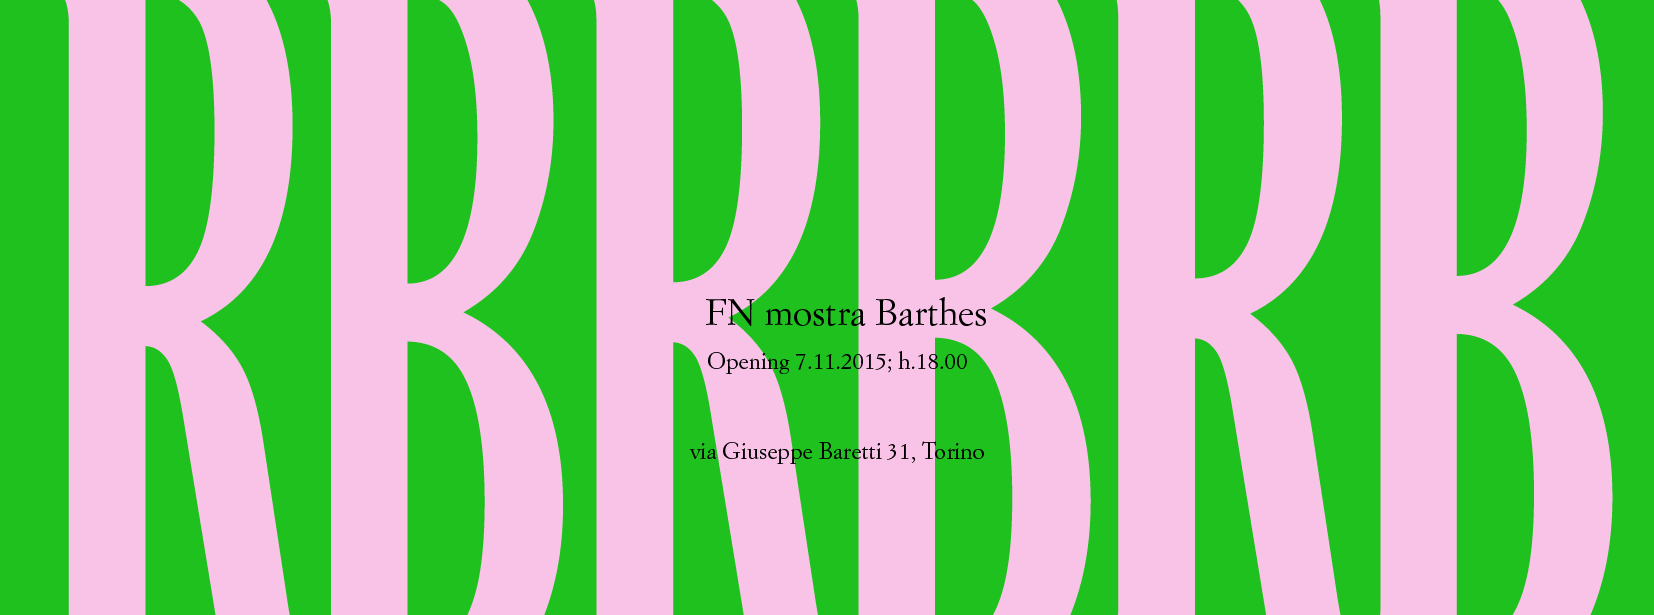 FN mostra Barthes